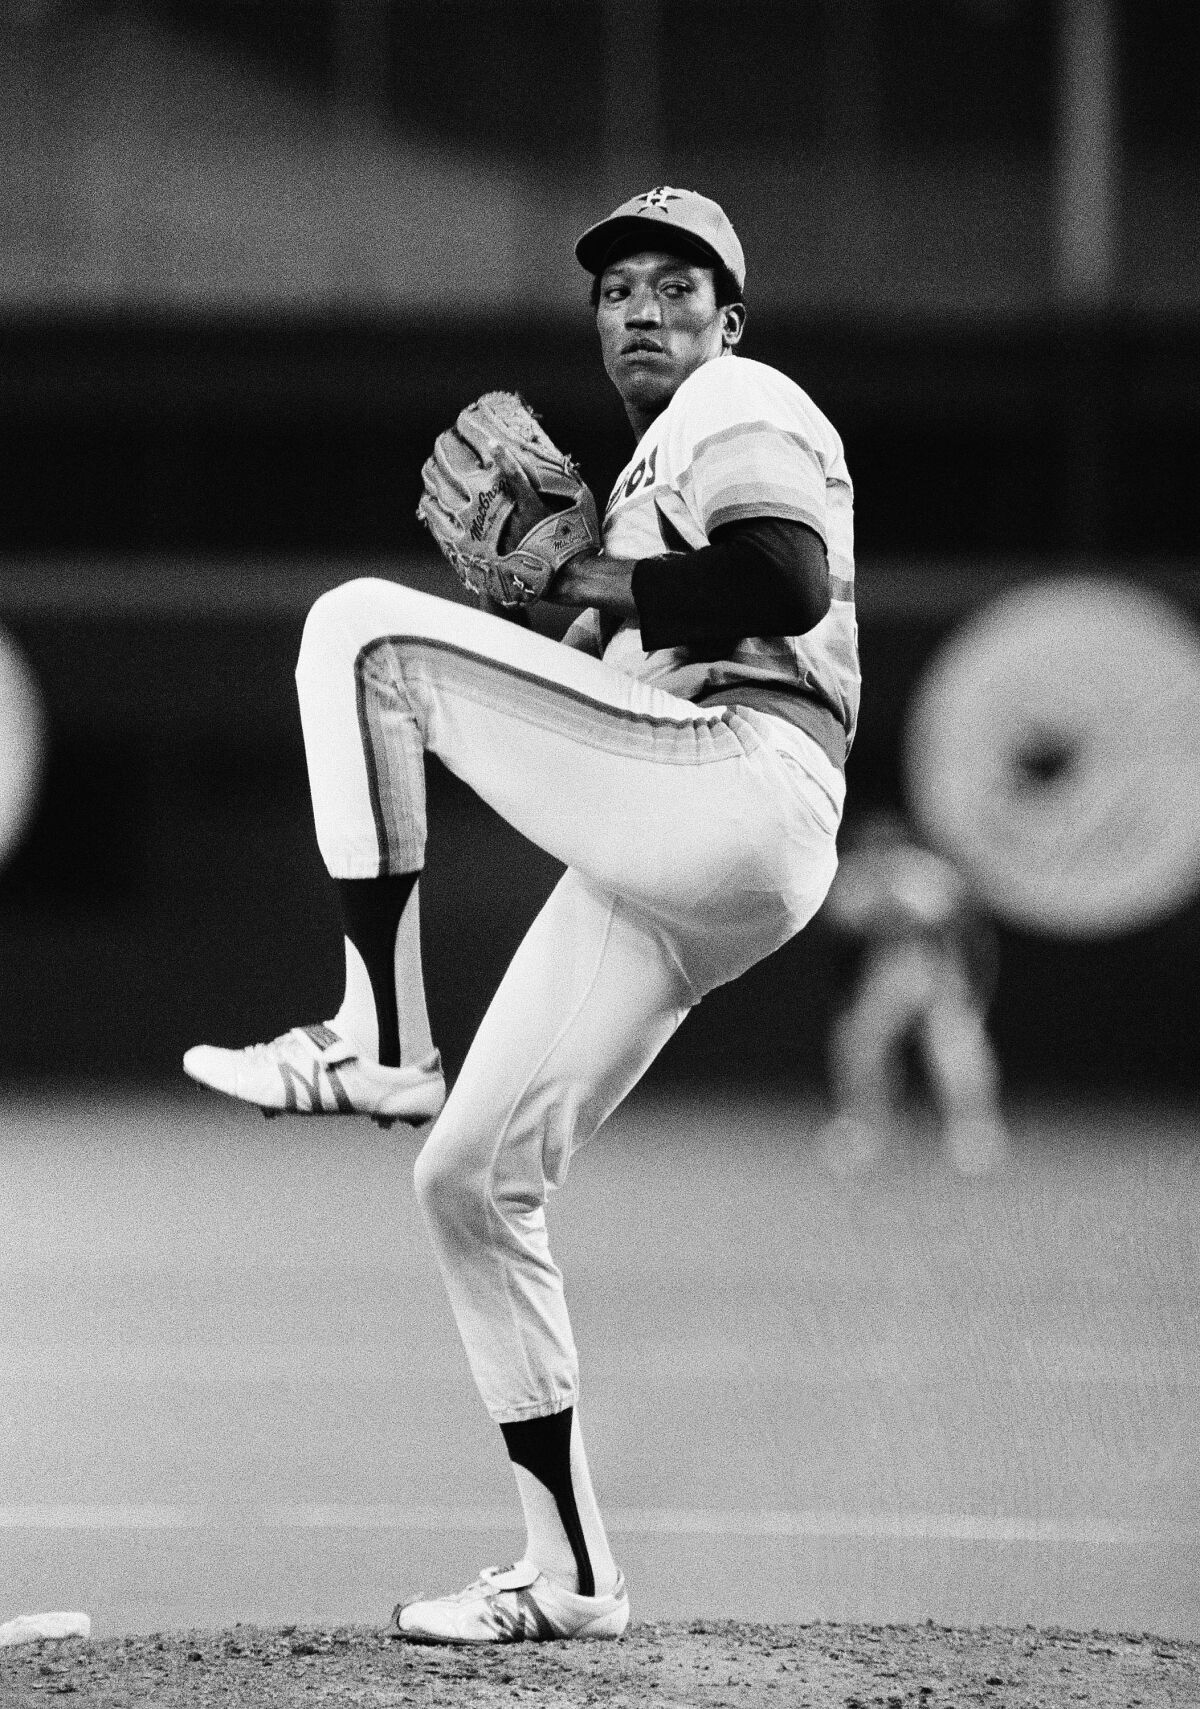 The Astros' J.R. Richard pitches against the Chicago Cubs on June 12, 1980, in Houston.